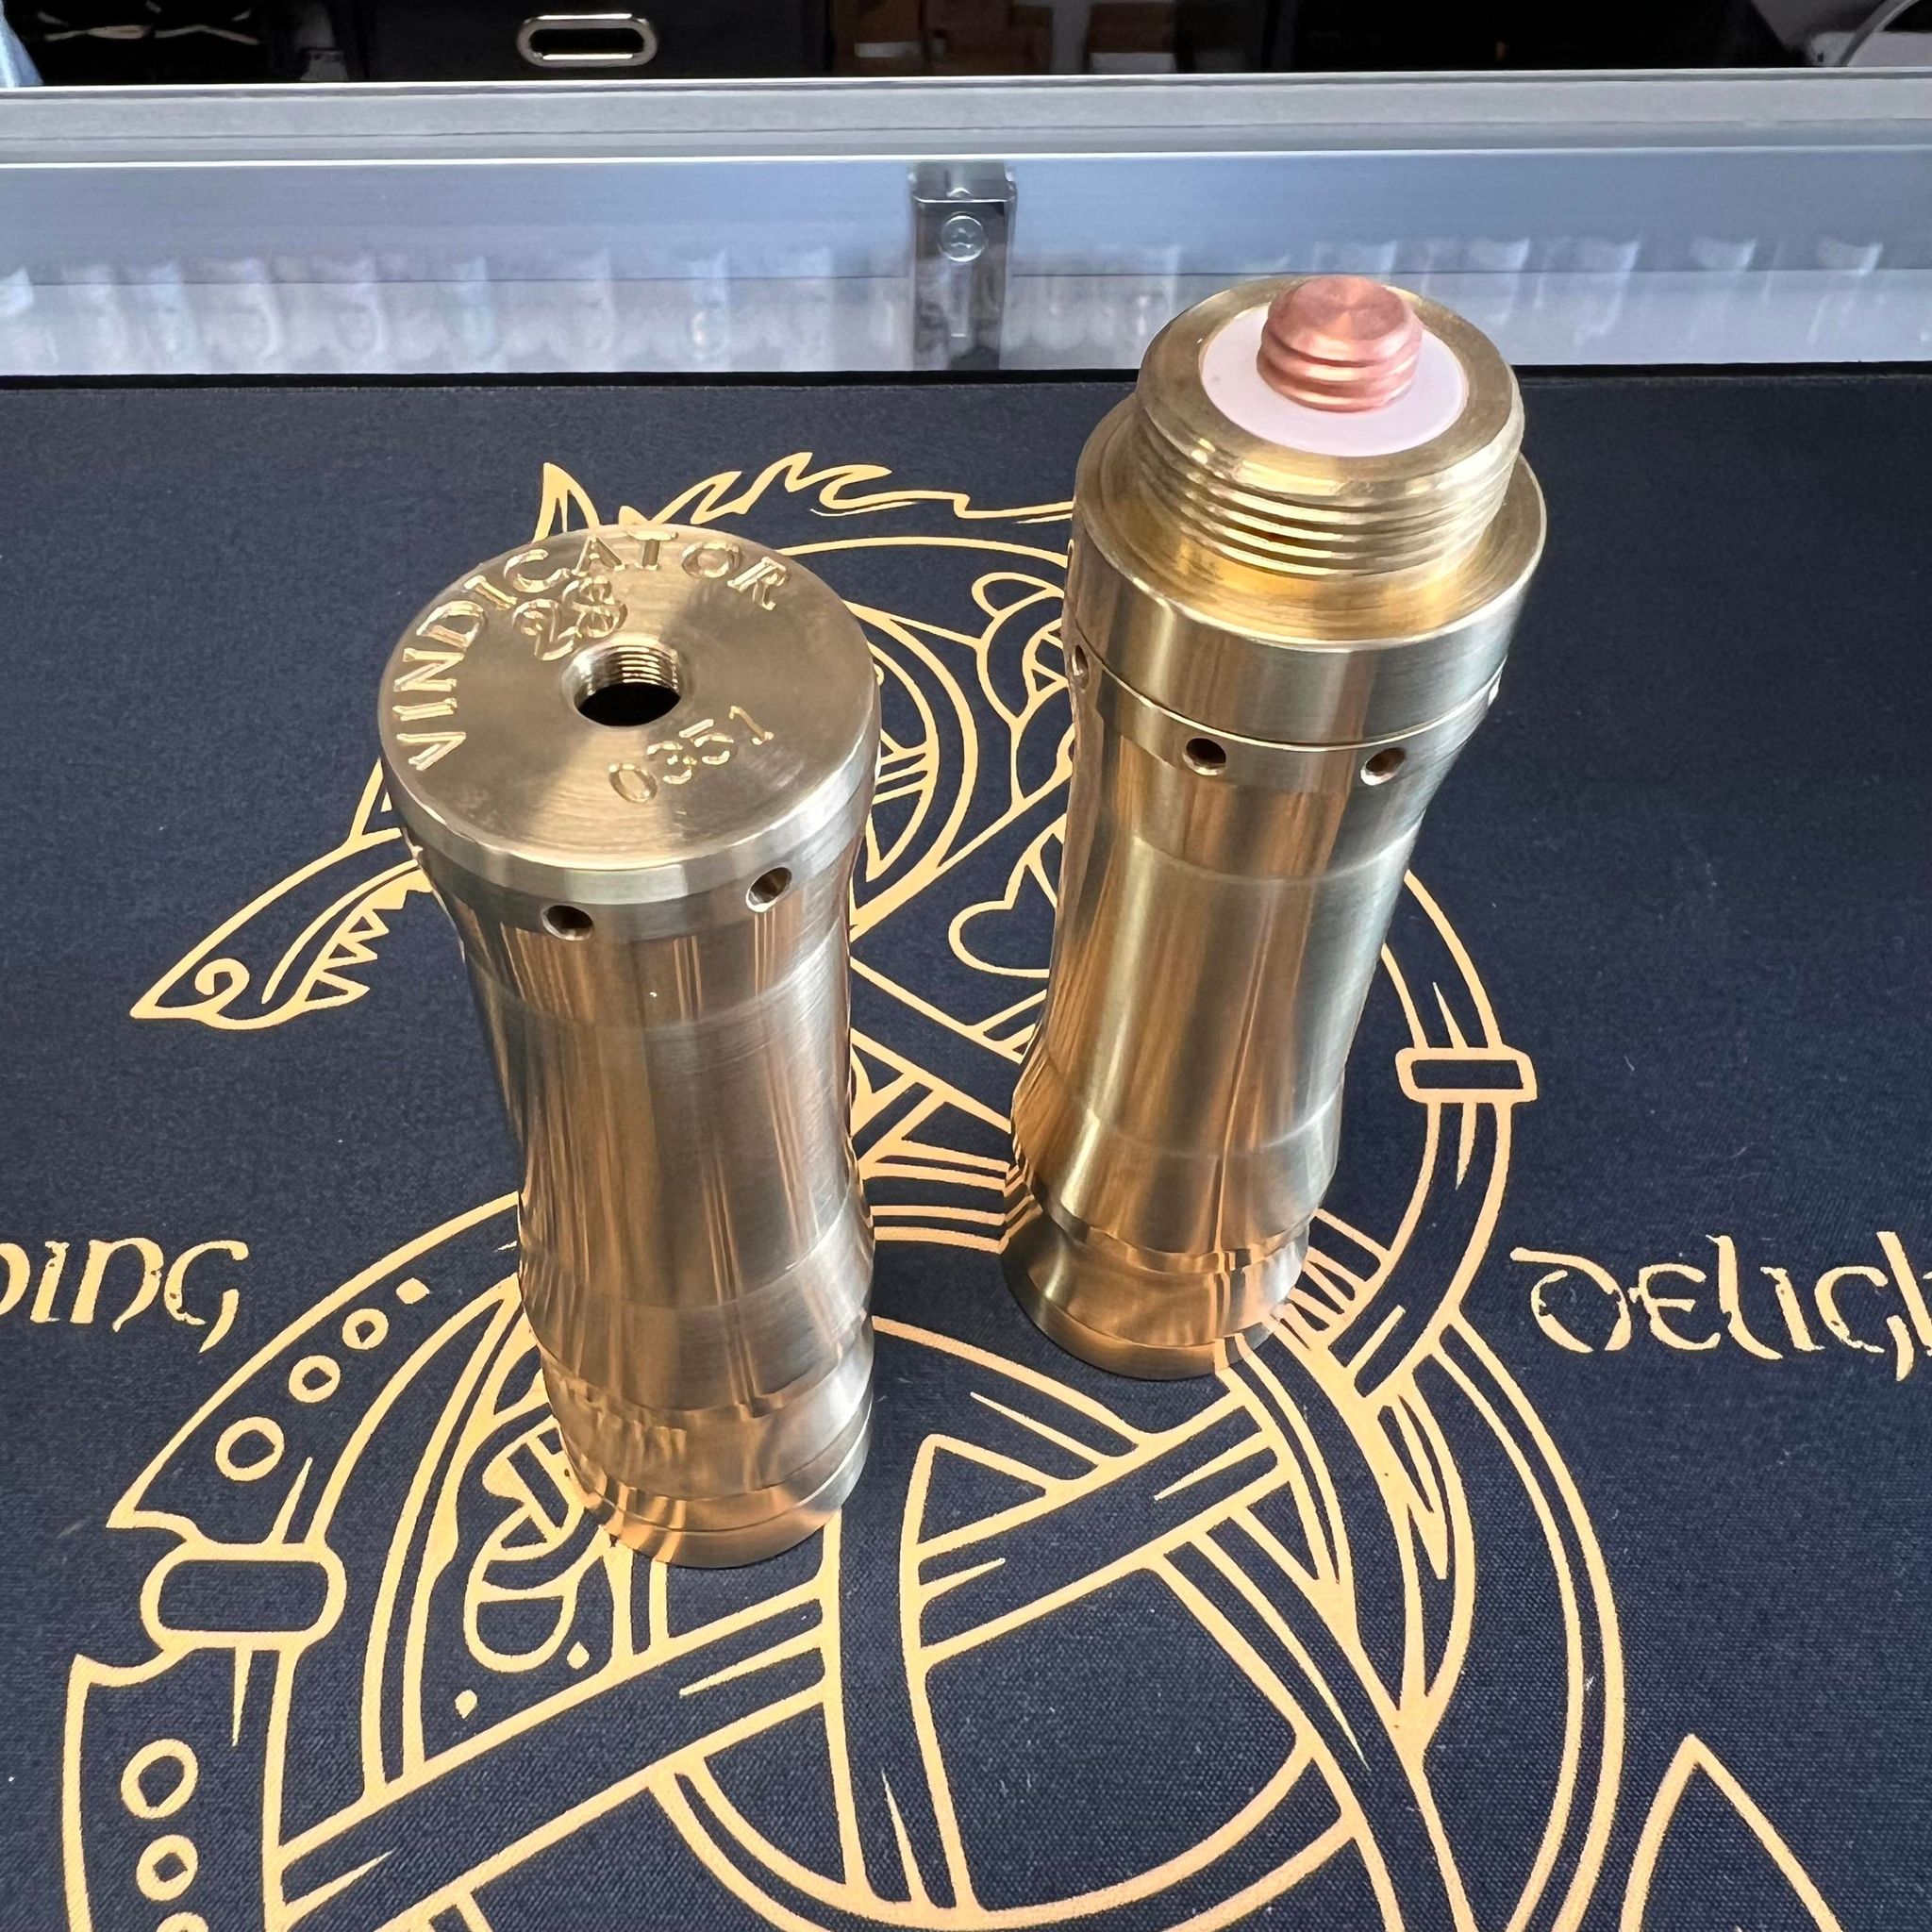 The Vindicator 28mm with Stack Mech Mod by Kennedy Enterprises